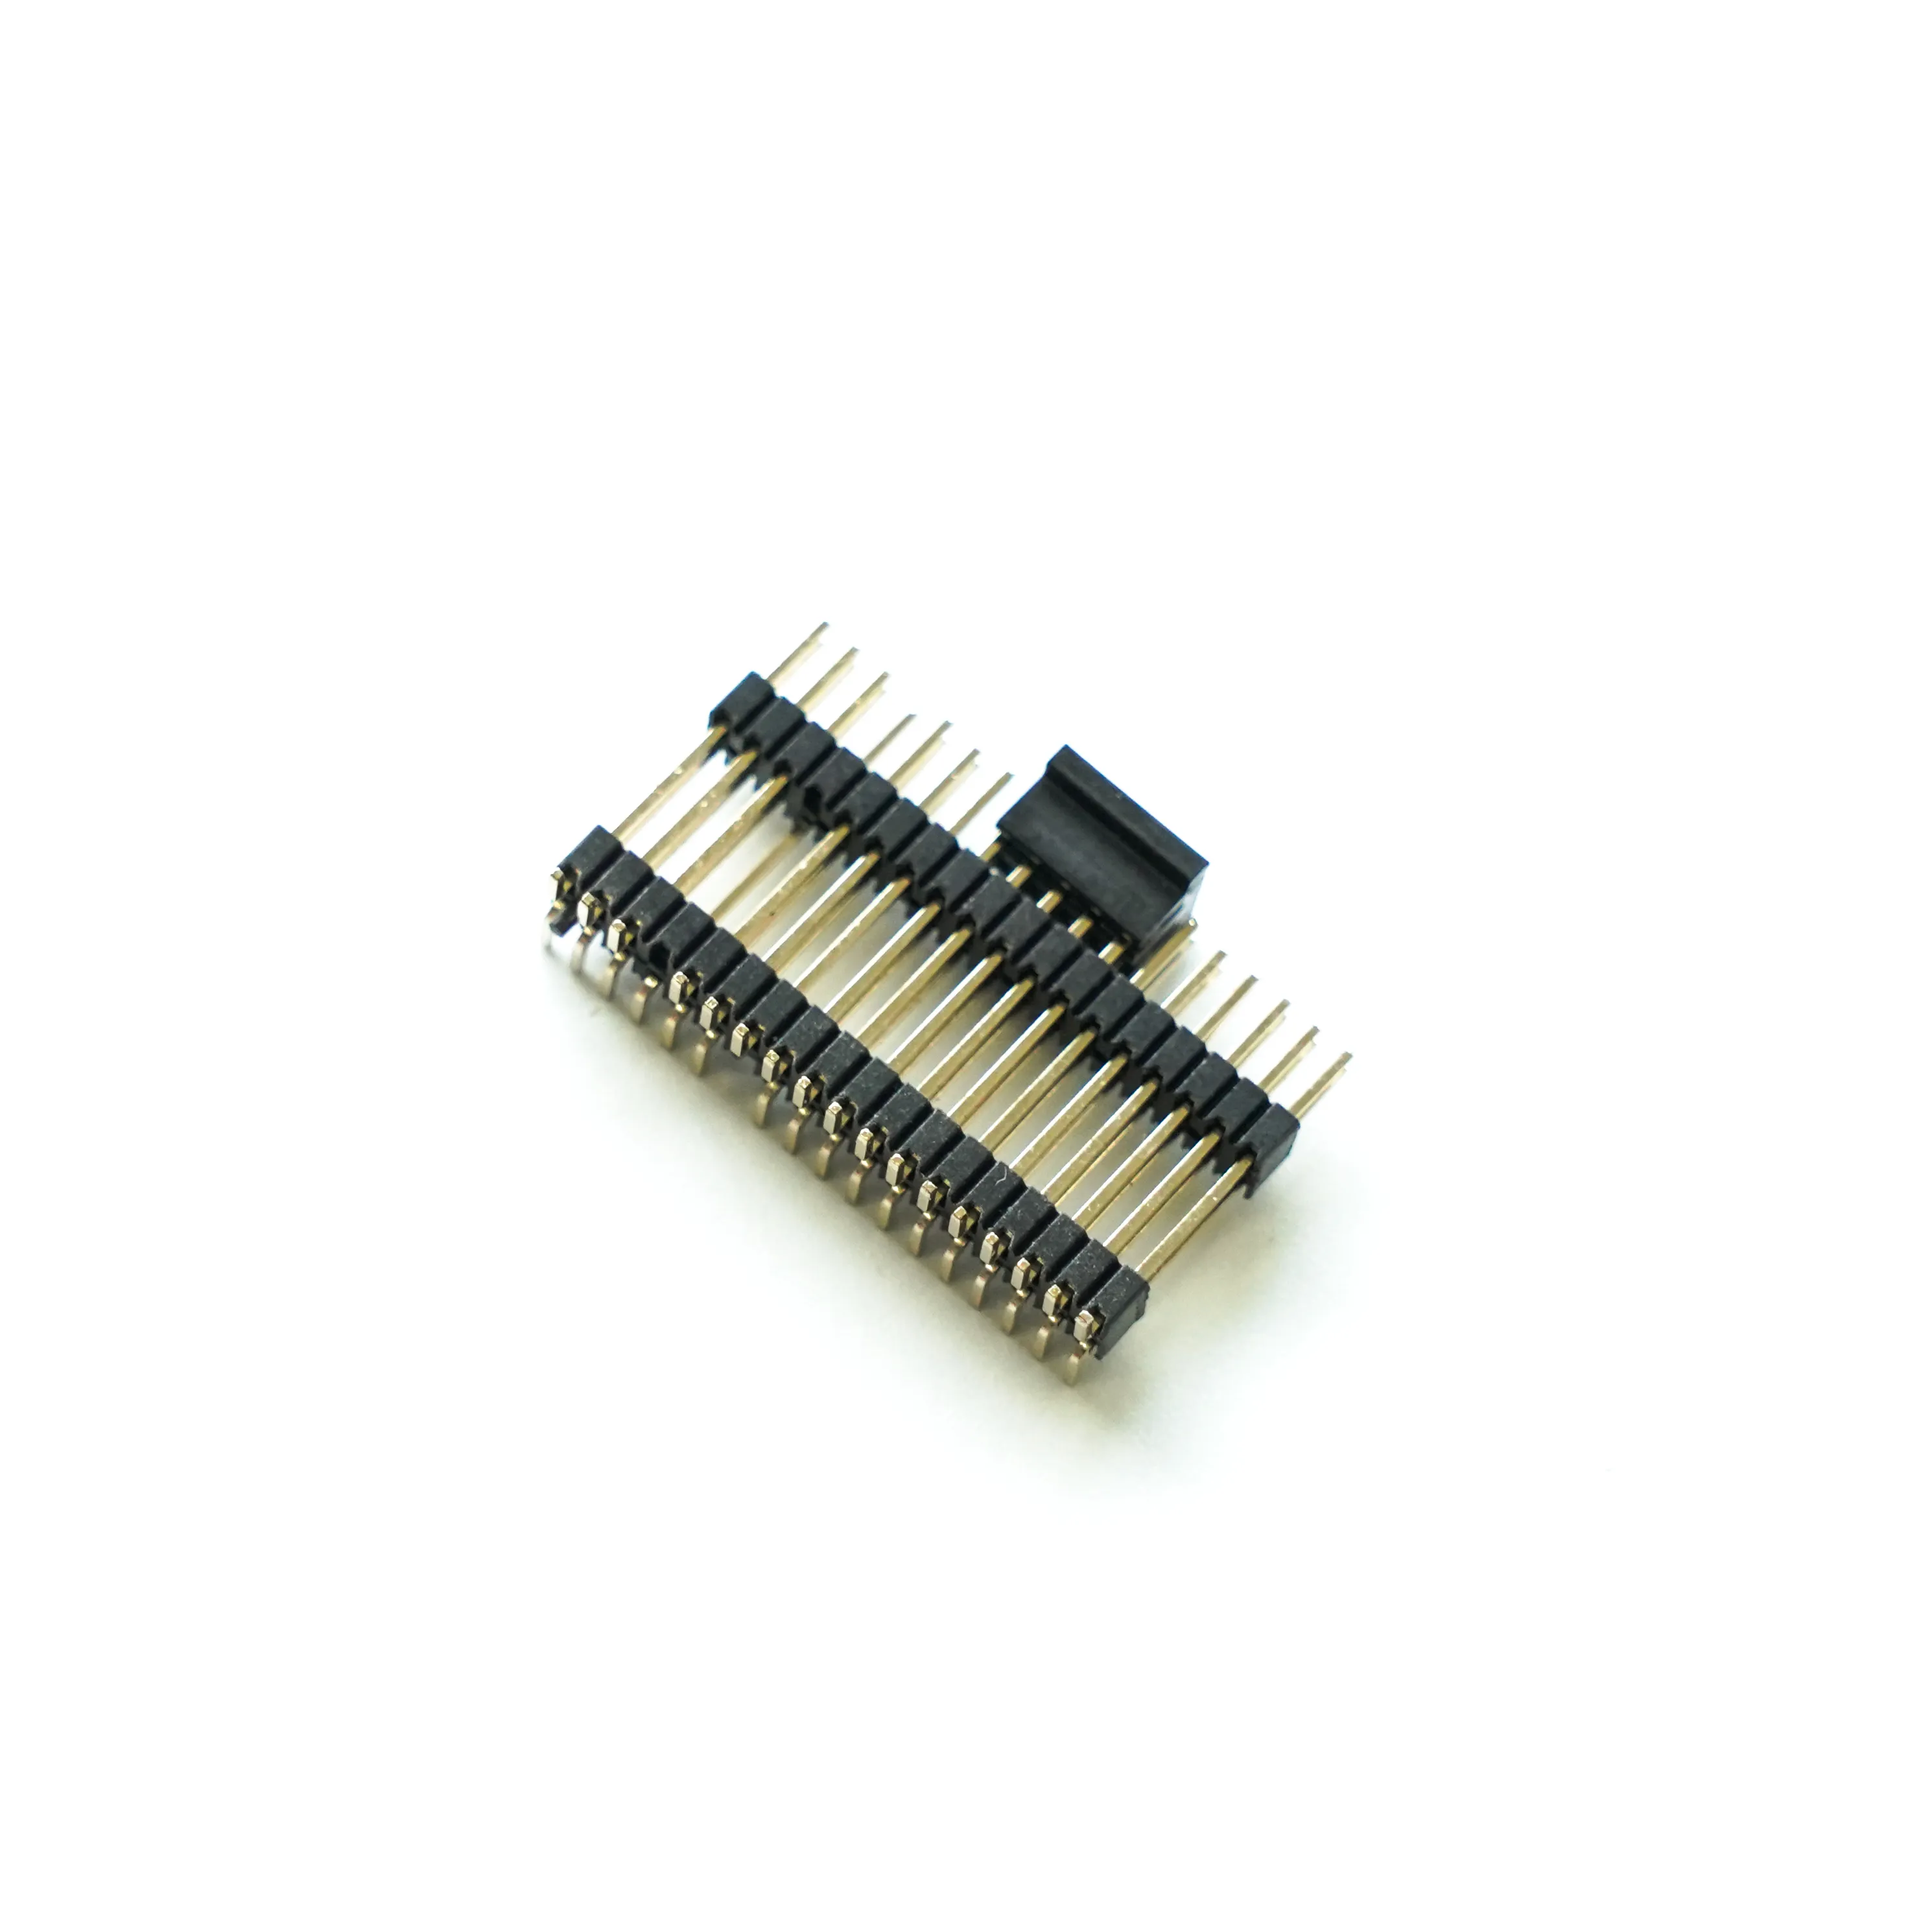 Newly designed 2.54mm female pin header connectors for pcb board